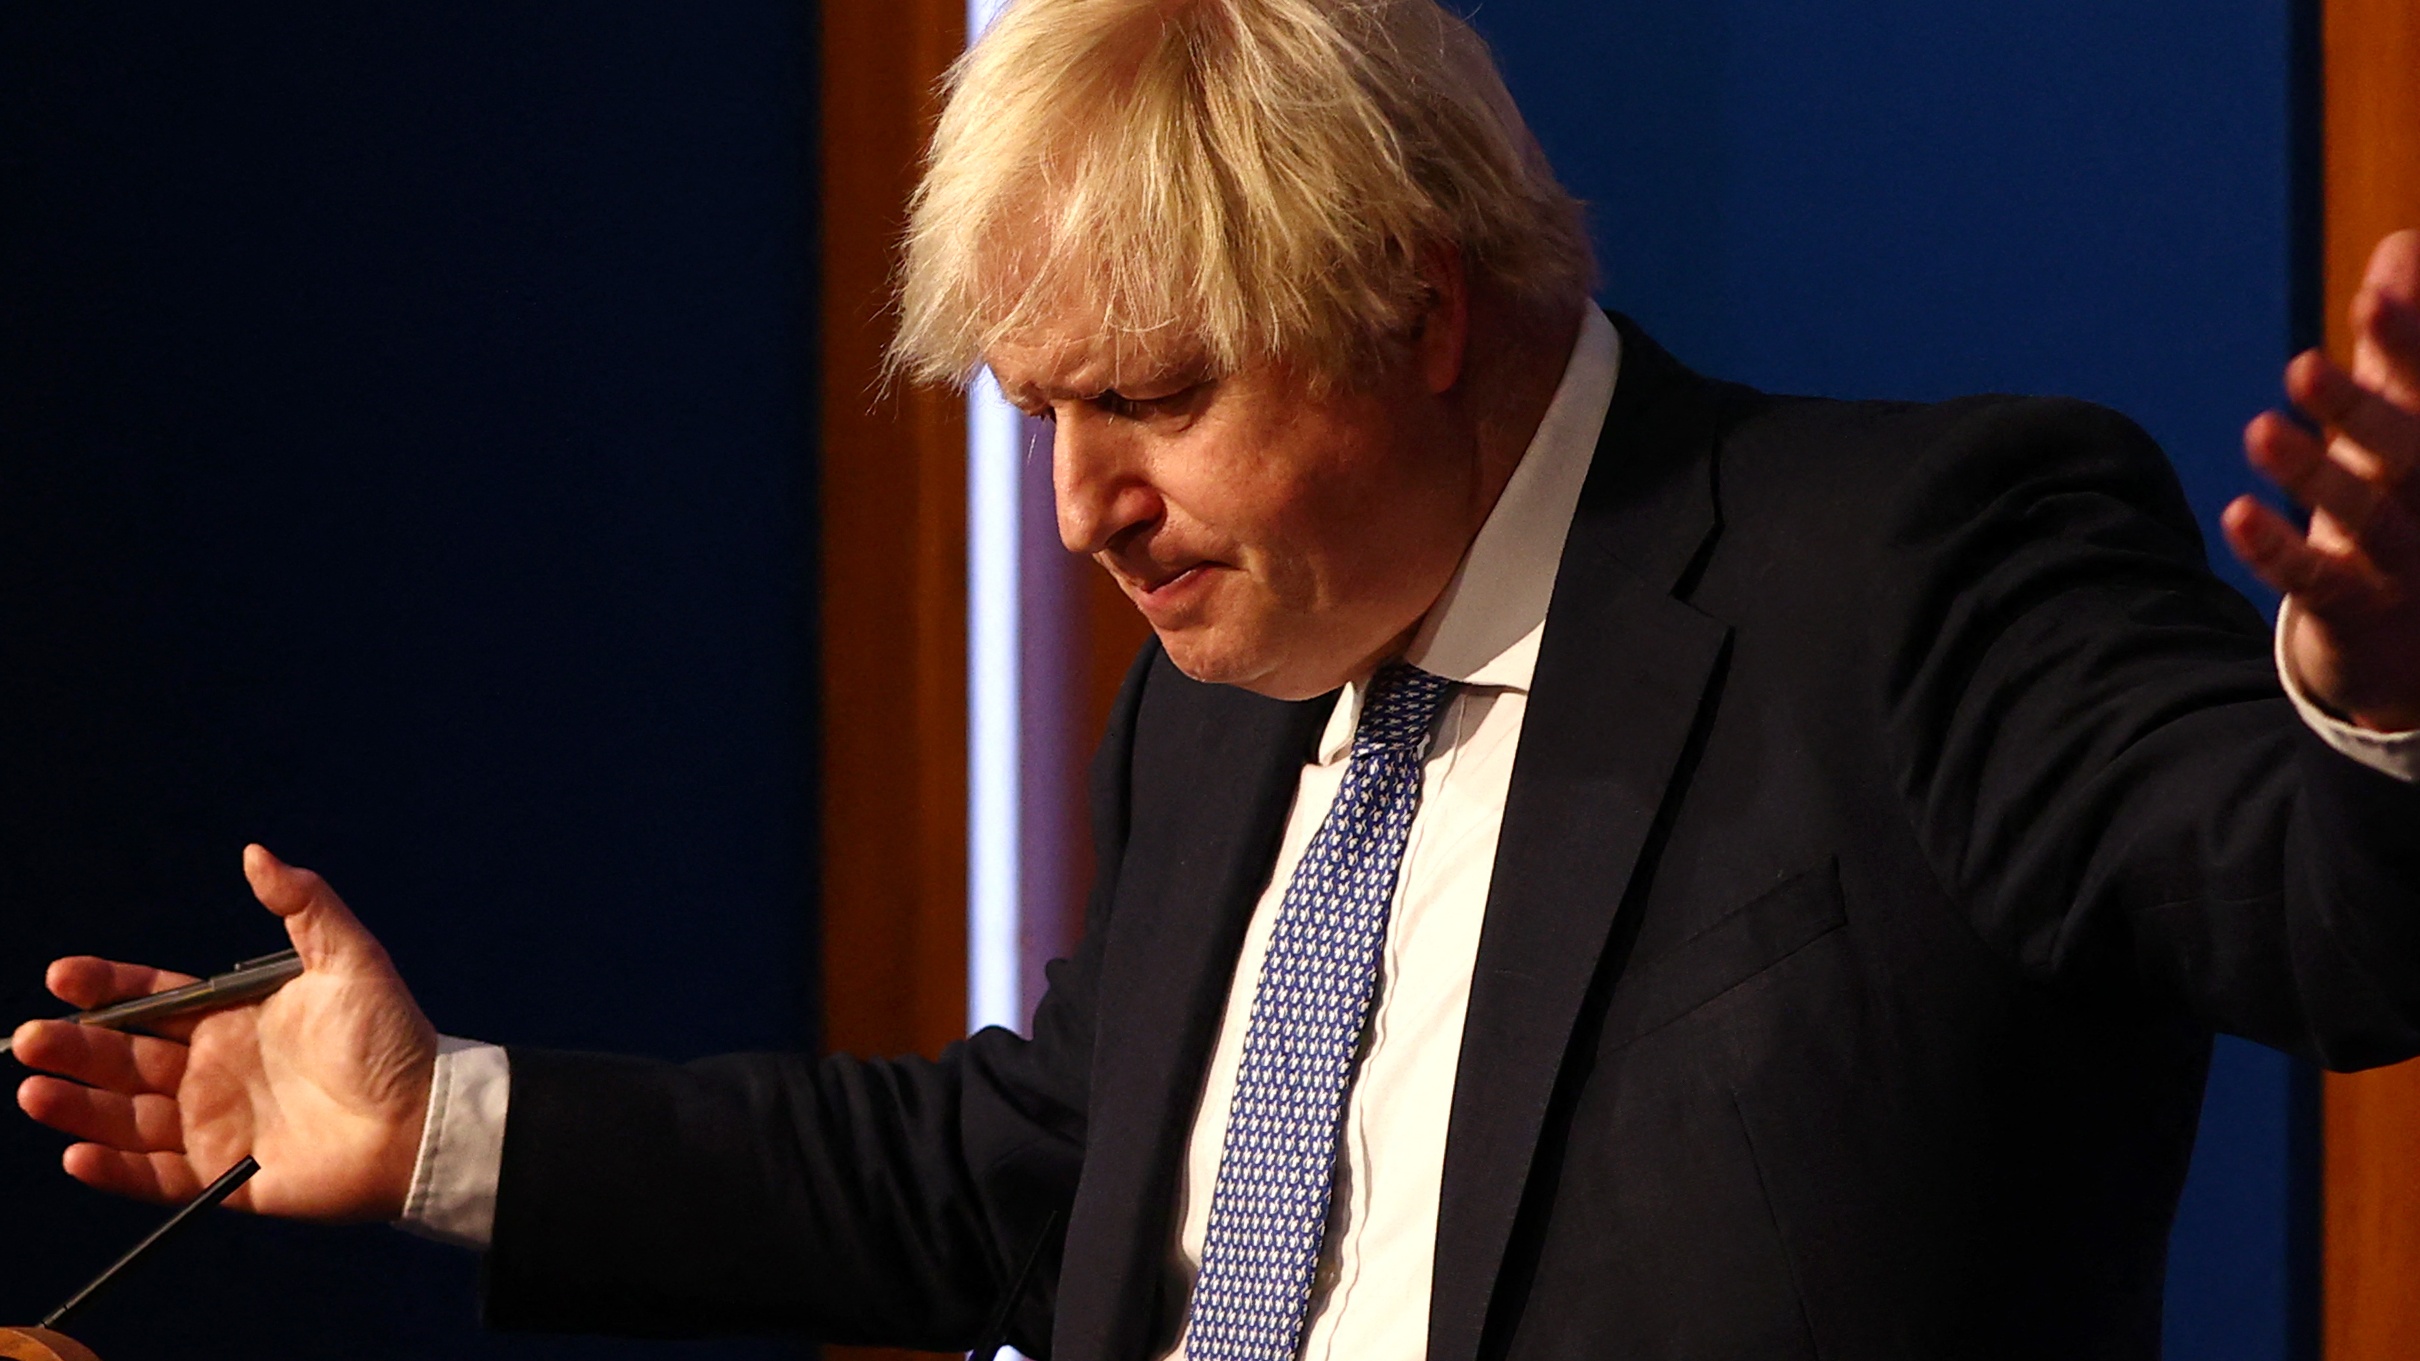 Boris Johnson gestures during a No. 10 press conference